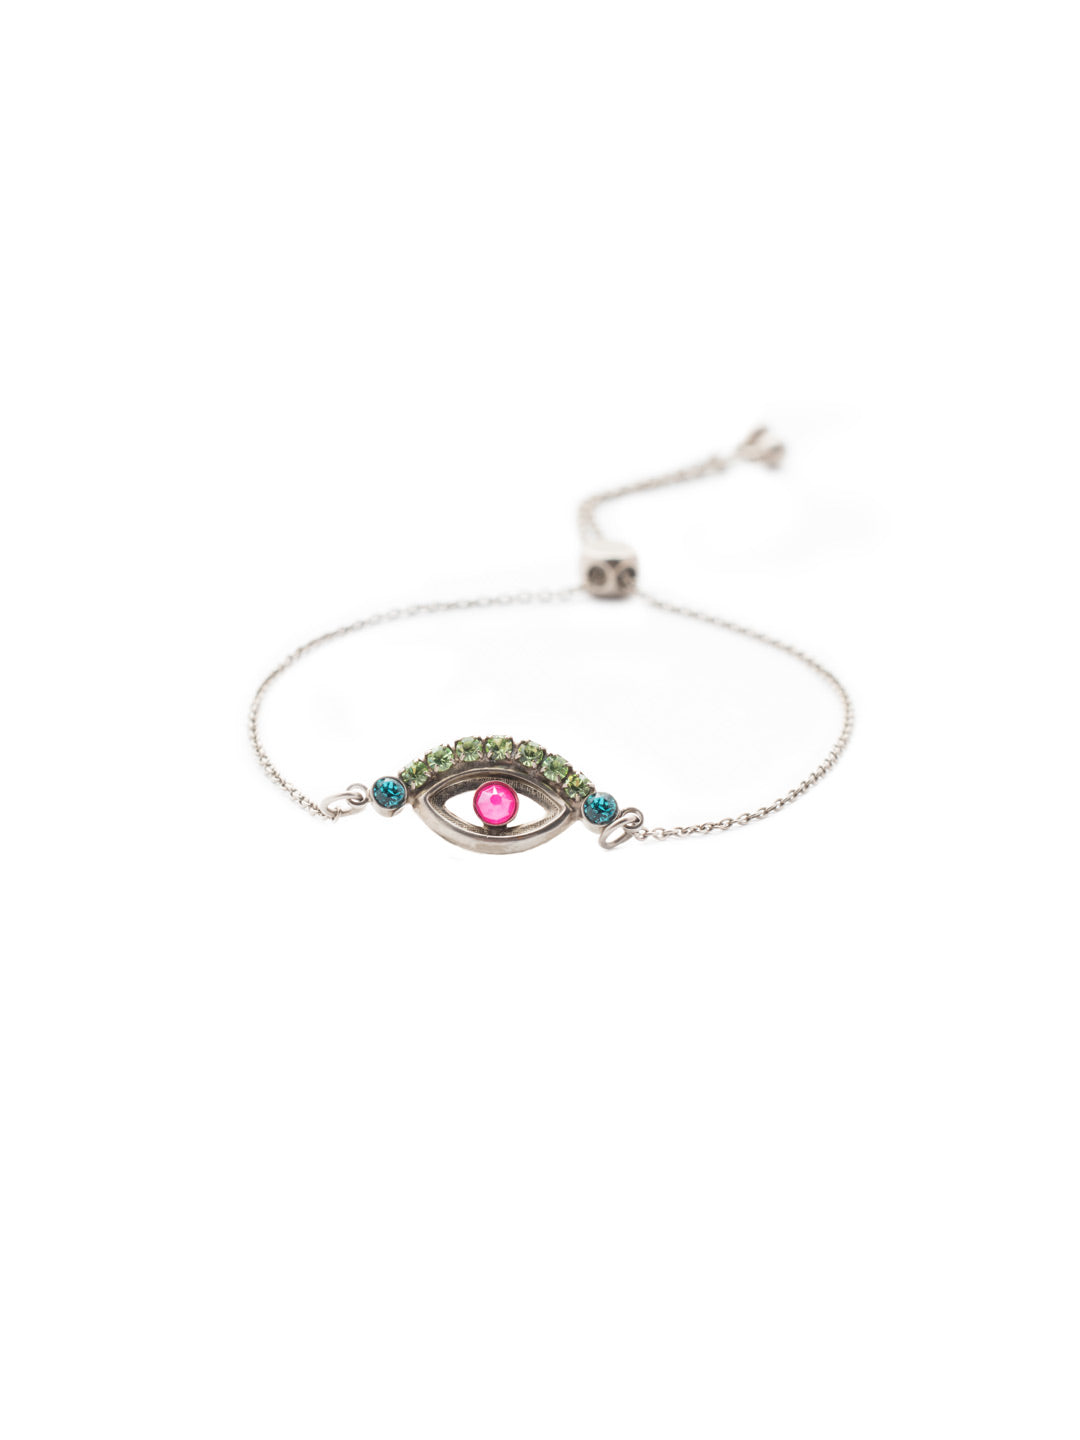 Mini Evil Eye Slider Bracelet - BEV6ASWDW - <p>Feeling a bit edgy? Slip on the Mini Evil Eye Slider Bracelet and show off this protective amulet, studded in sparkling crystals. From Sorrelli's Wild Watermelon collection in our Antique Silver-tone finish.</p>